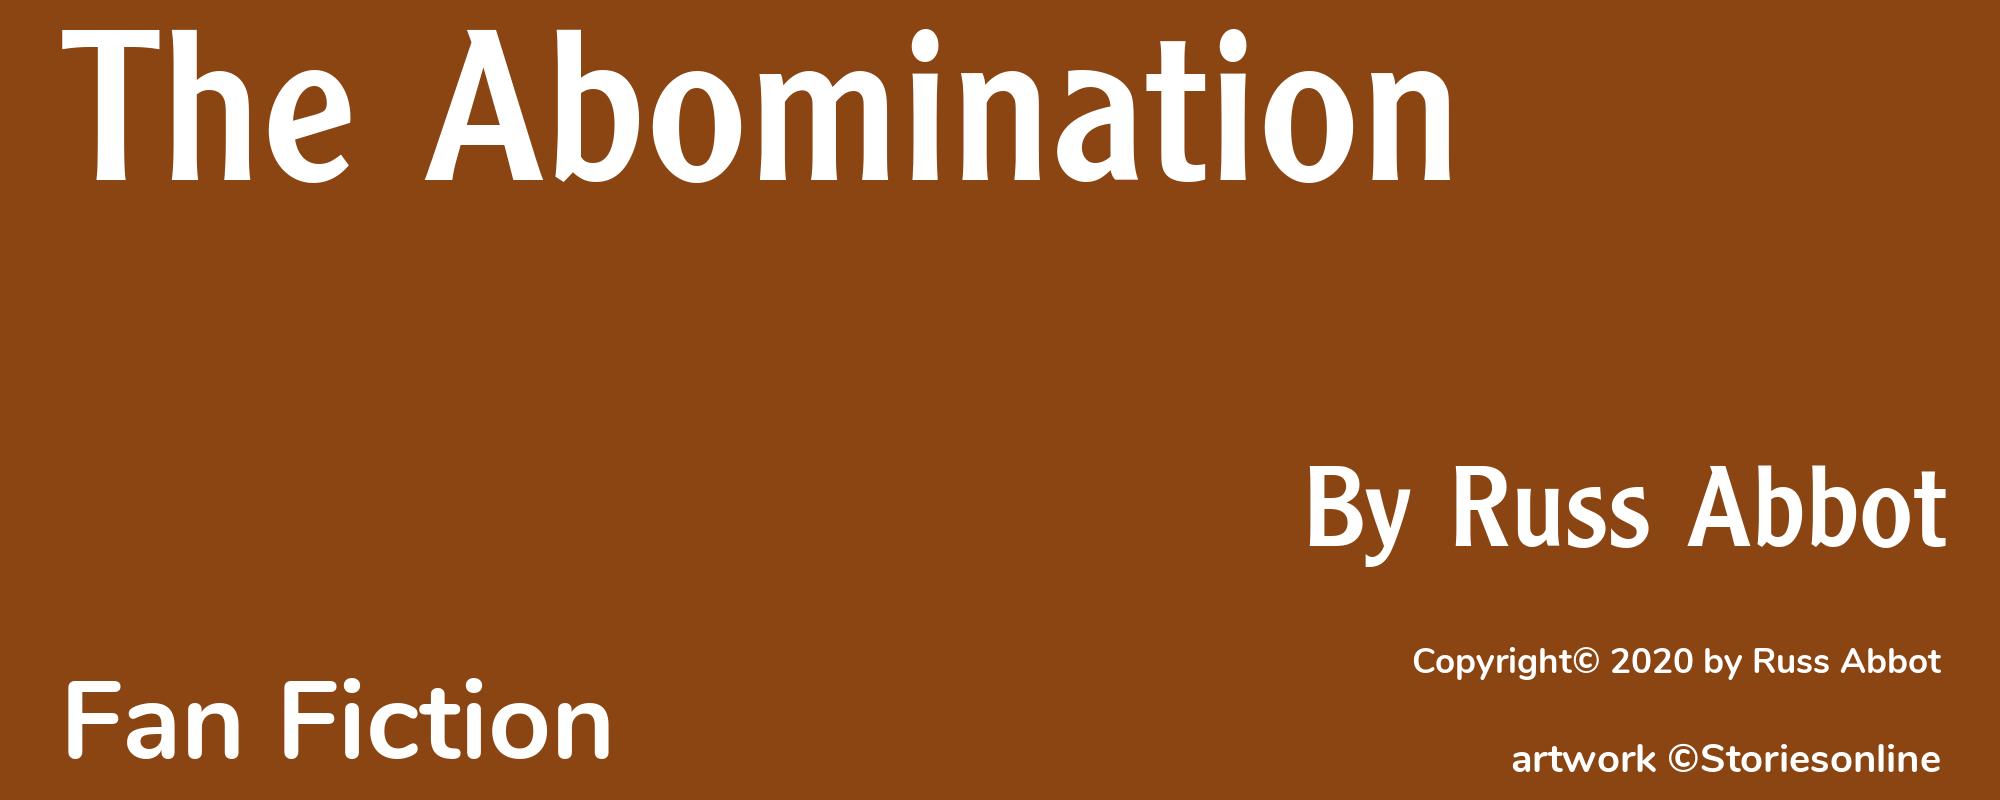 The Abomination - Cover